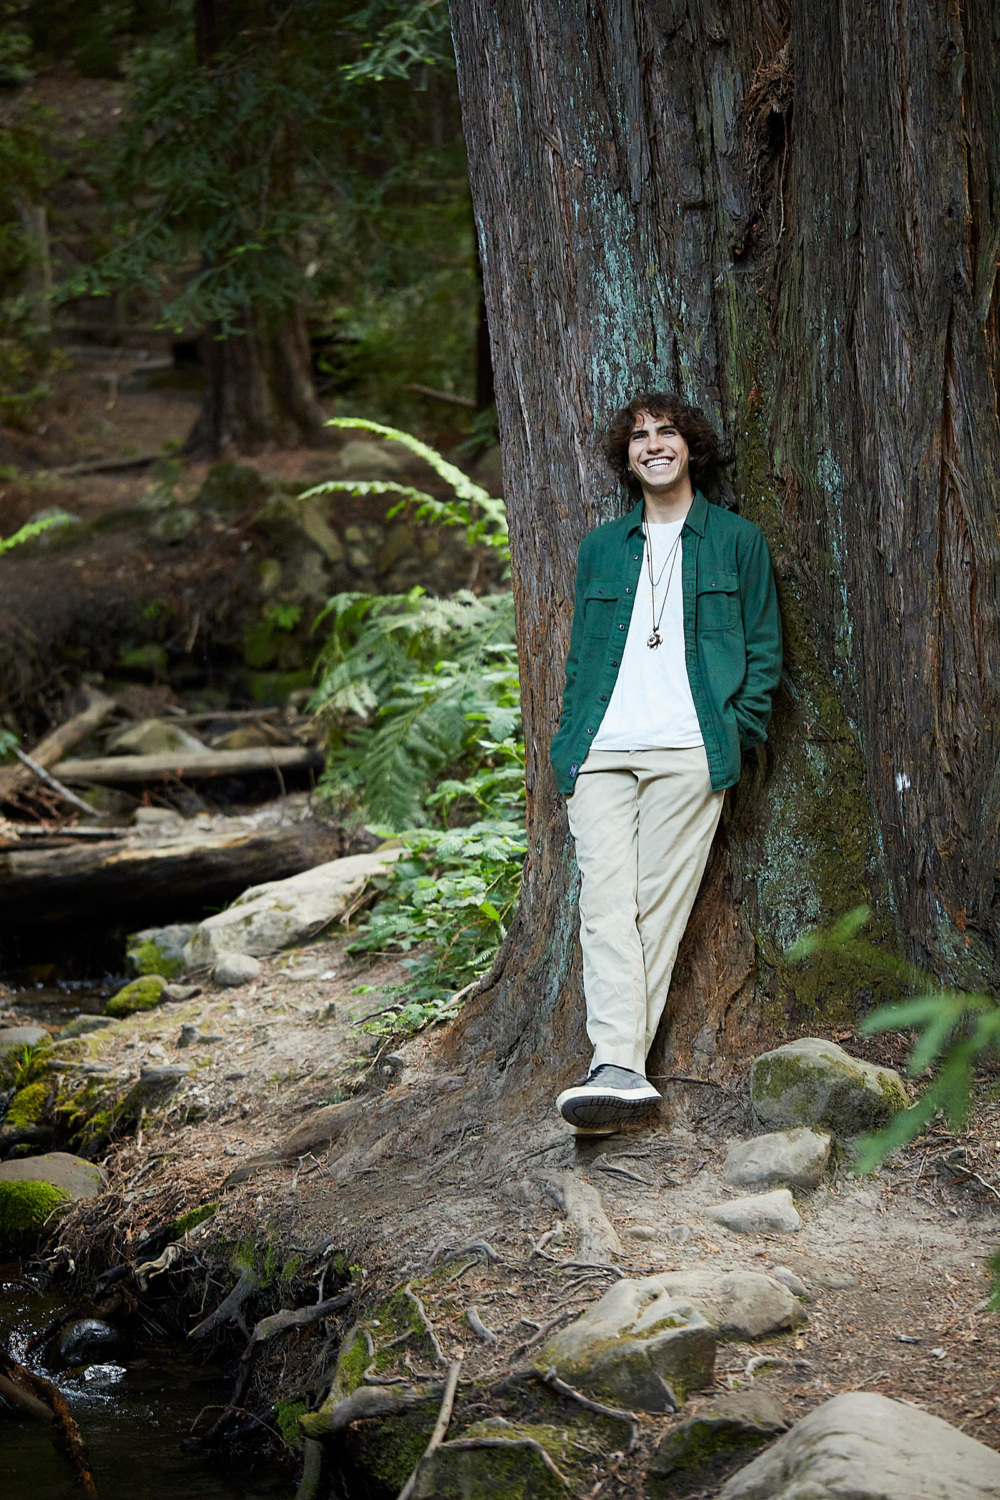 Julian Berkowitz-Sklar smiles while leaning against a tree.